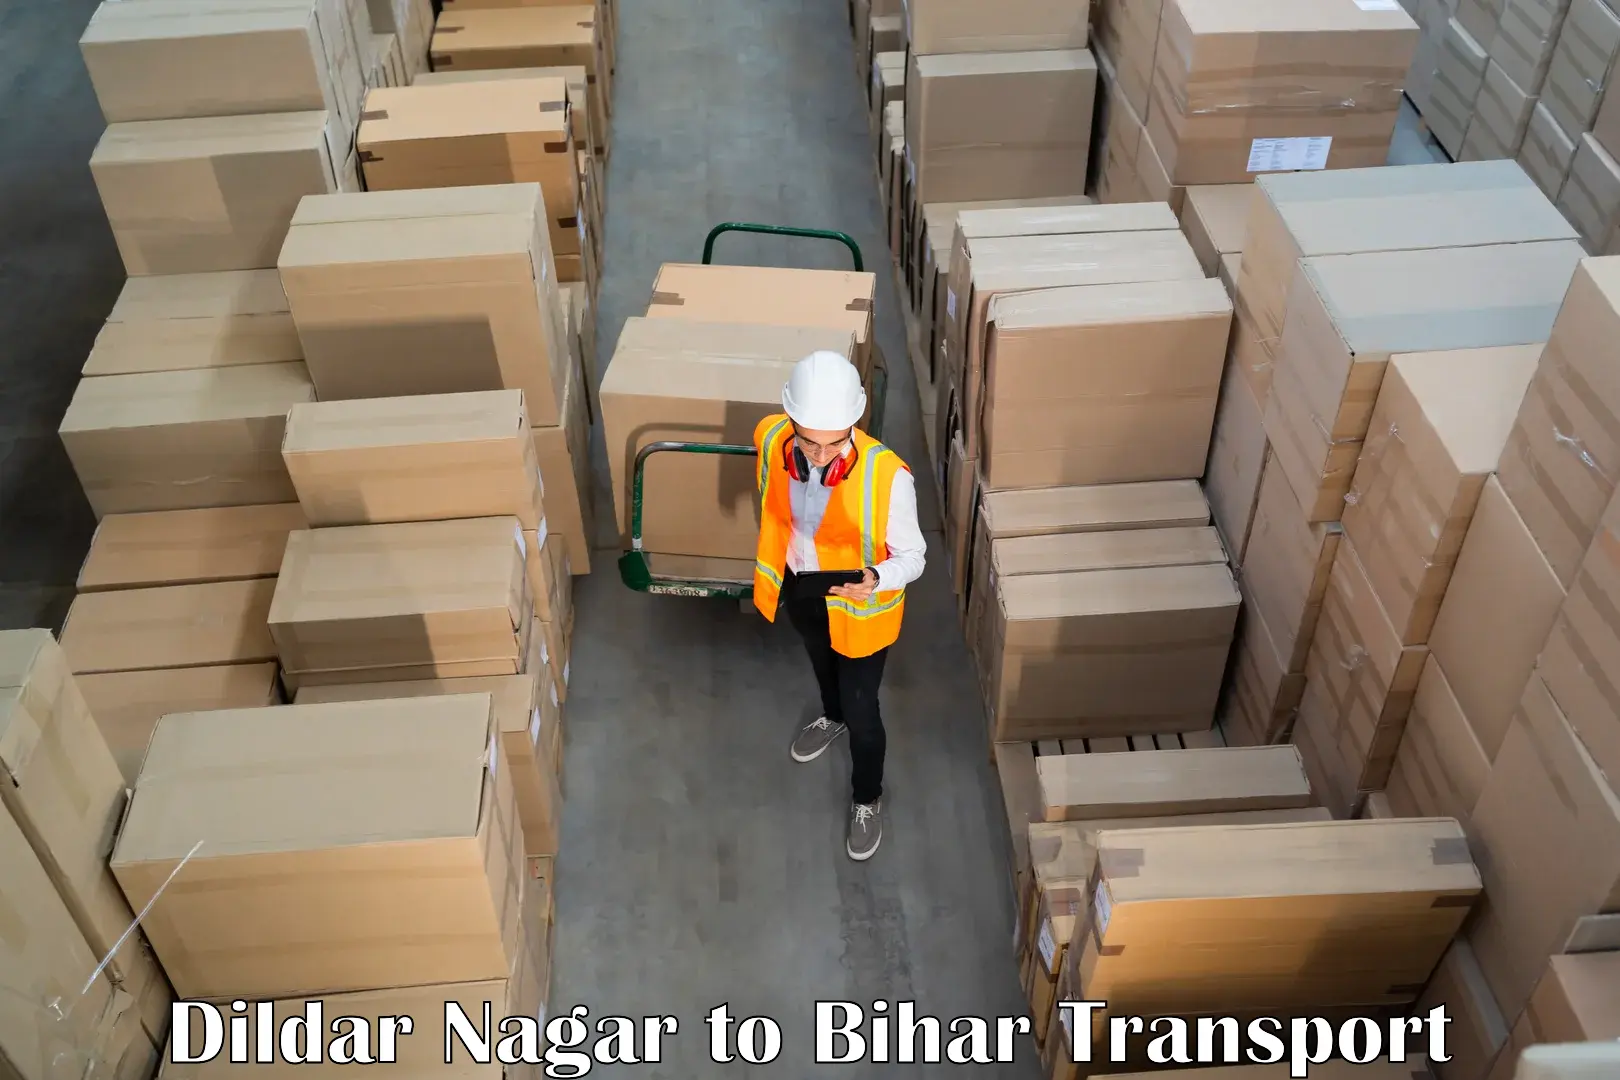 Container transport service in Dildar Nagar to Fatwah